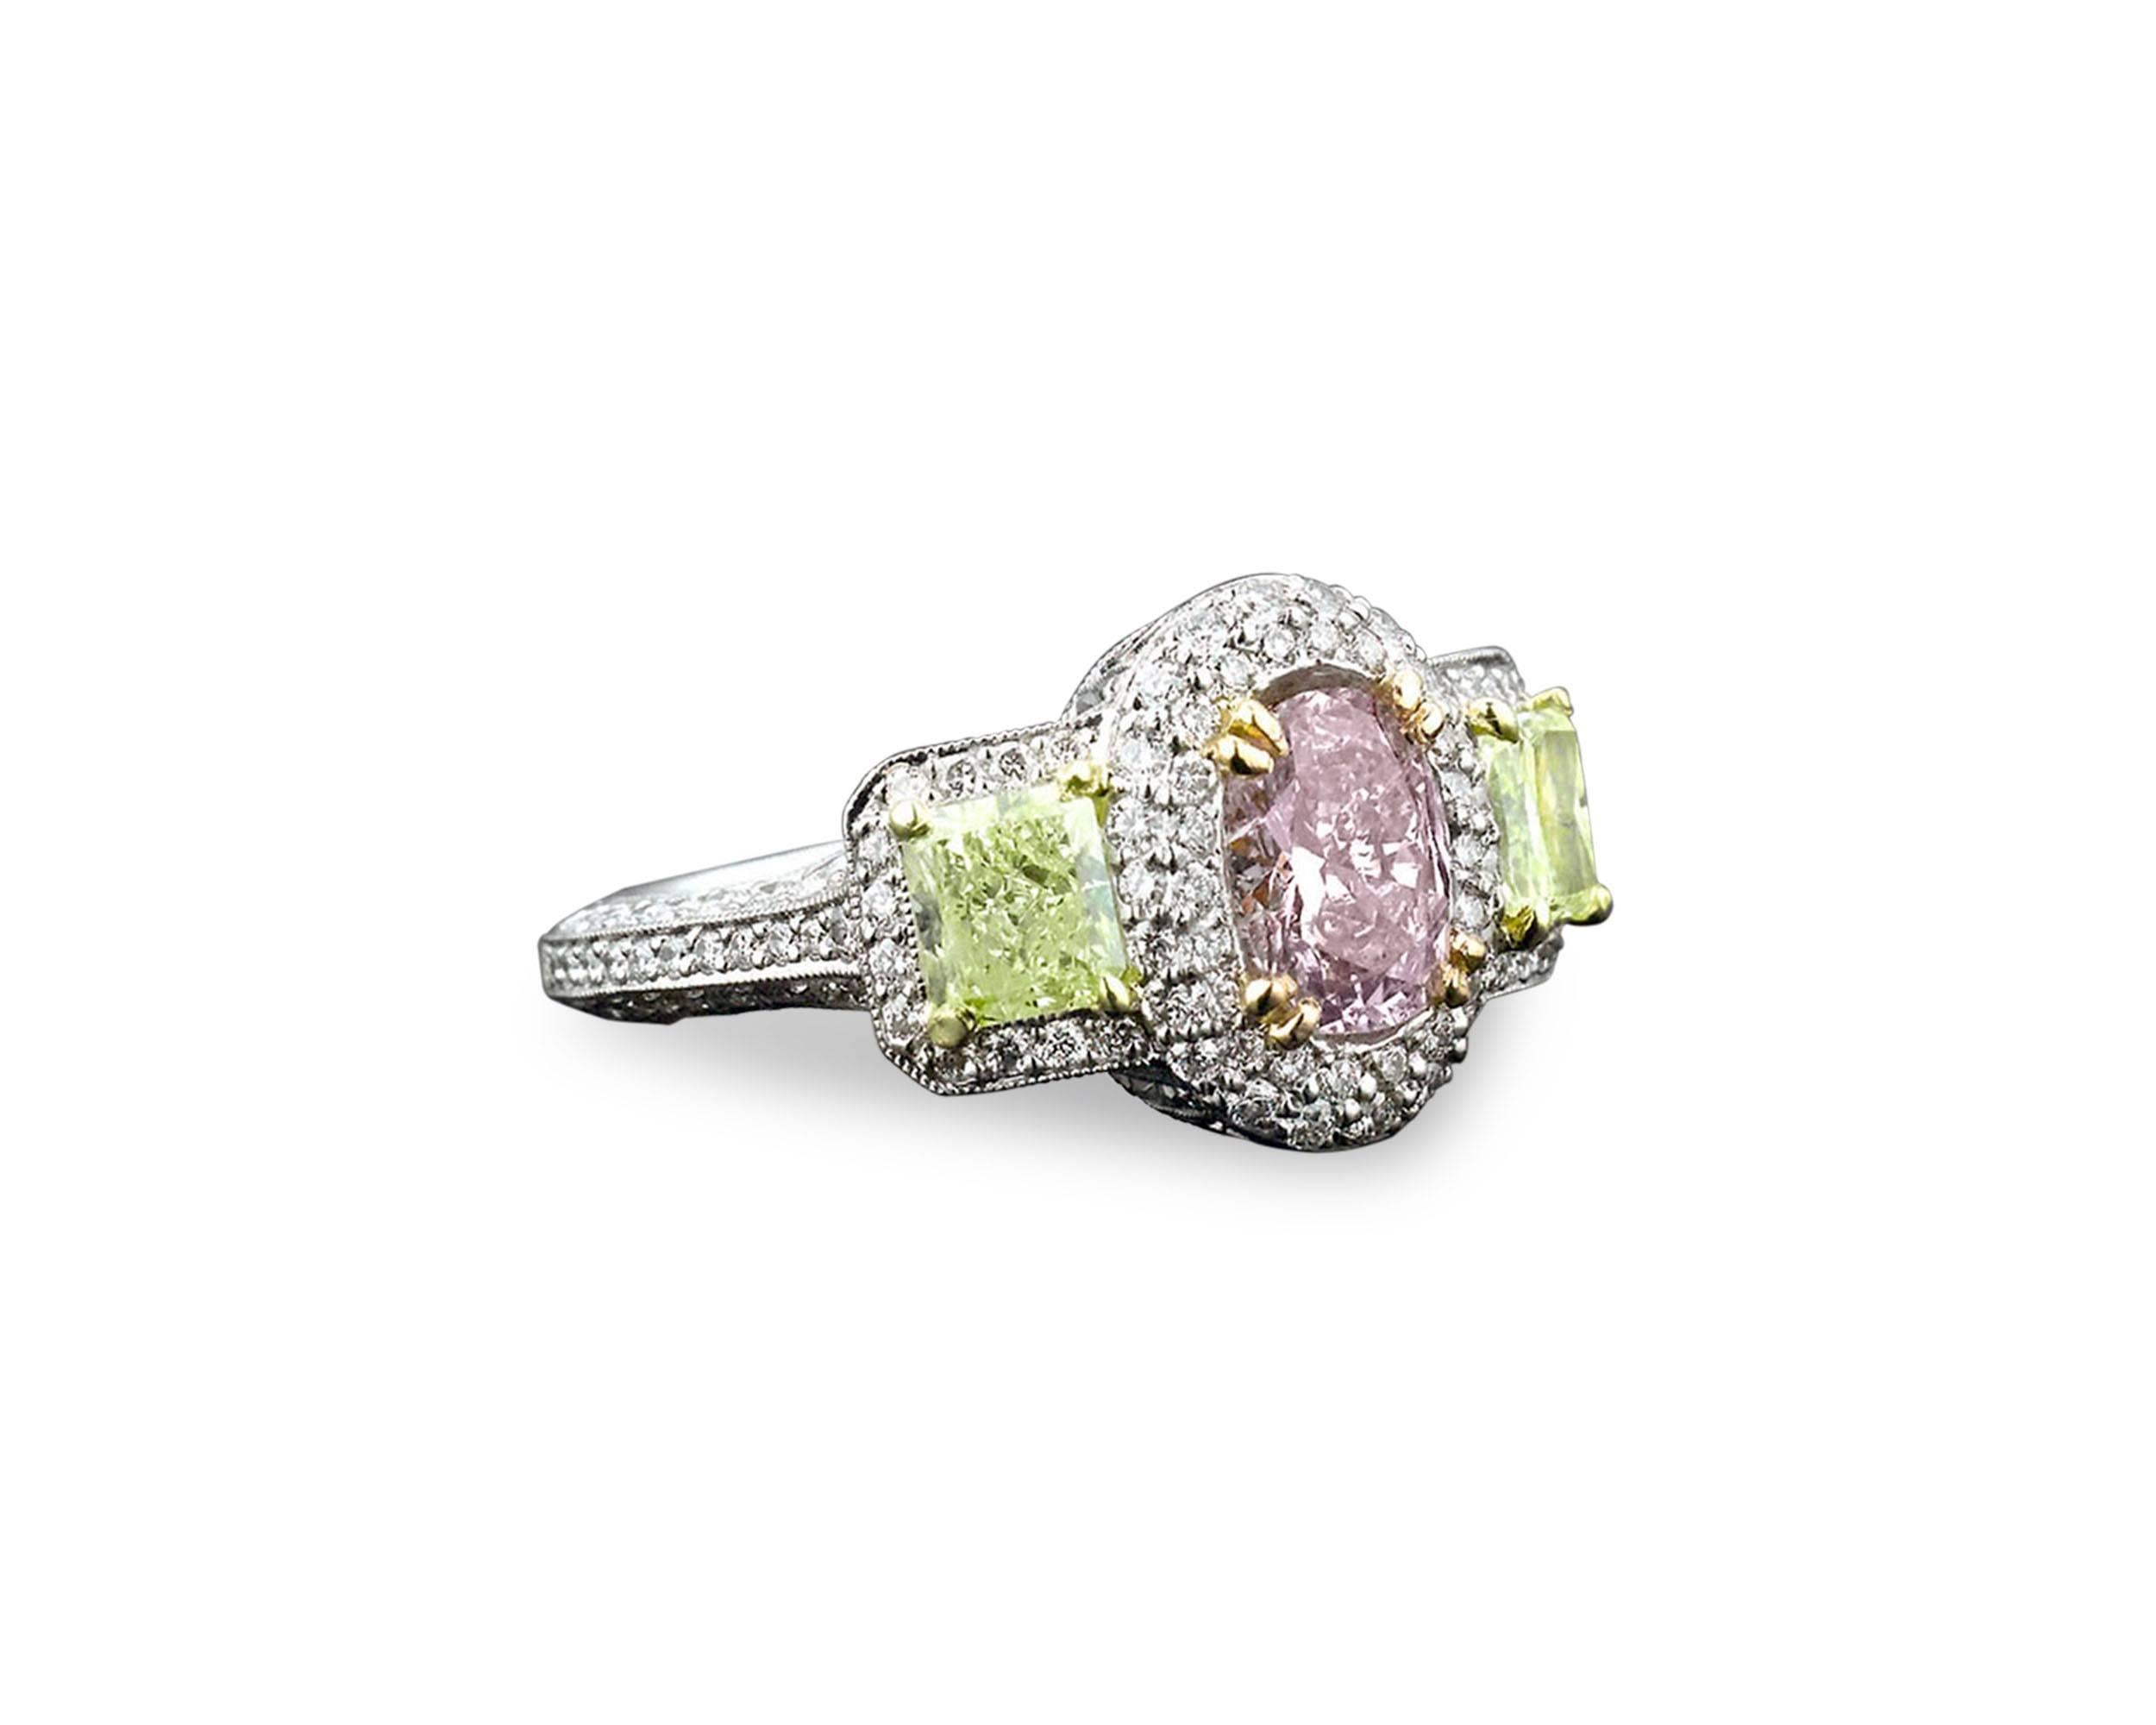 Colored diamonds are the rarest and most exquisite of nature's treasures. This ring showcases not one, but three natural fancy colored diamonds of brilliant color and shimmer. The center diamond is a stunning 1.08-carat pinkish-purple diamond, with